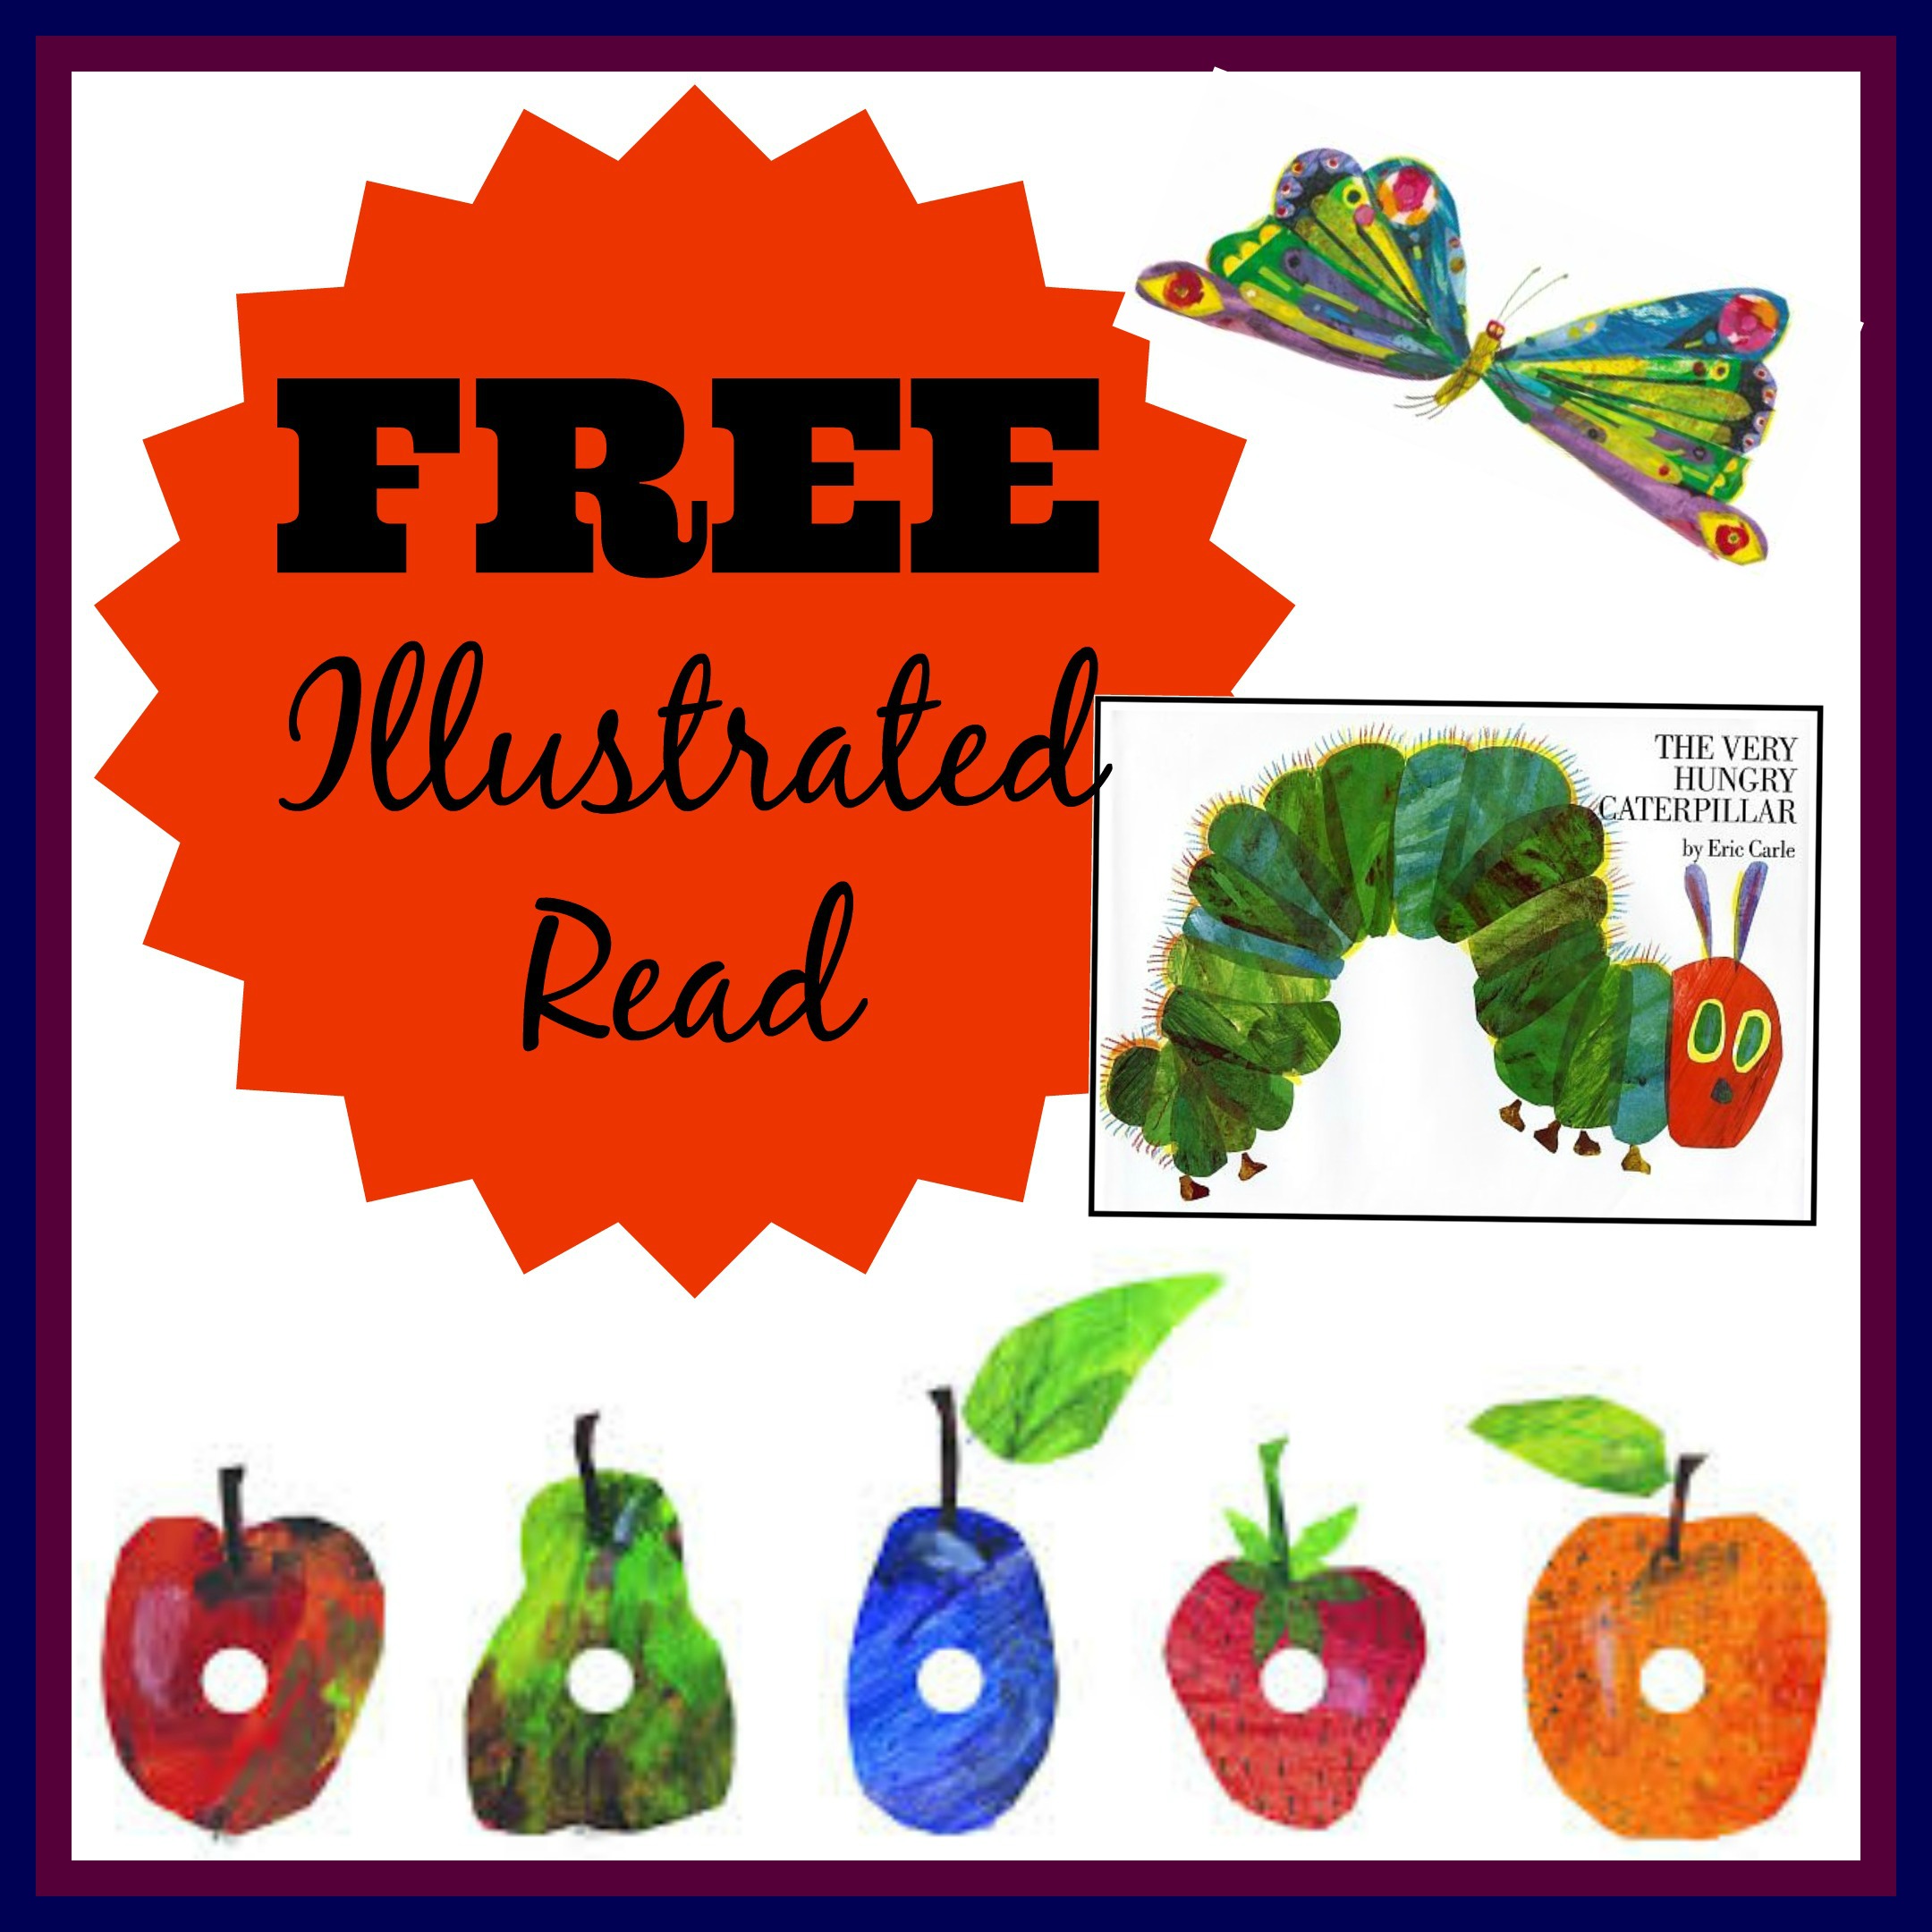 FREE The Very Hungry Caterpillar Illustrated Read